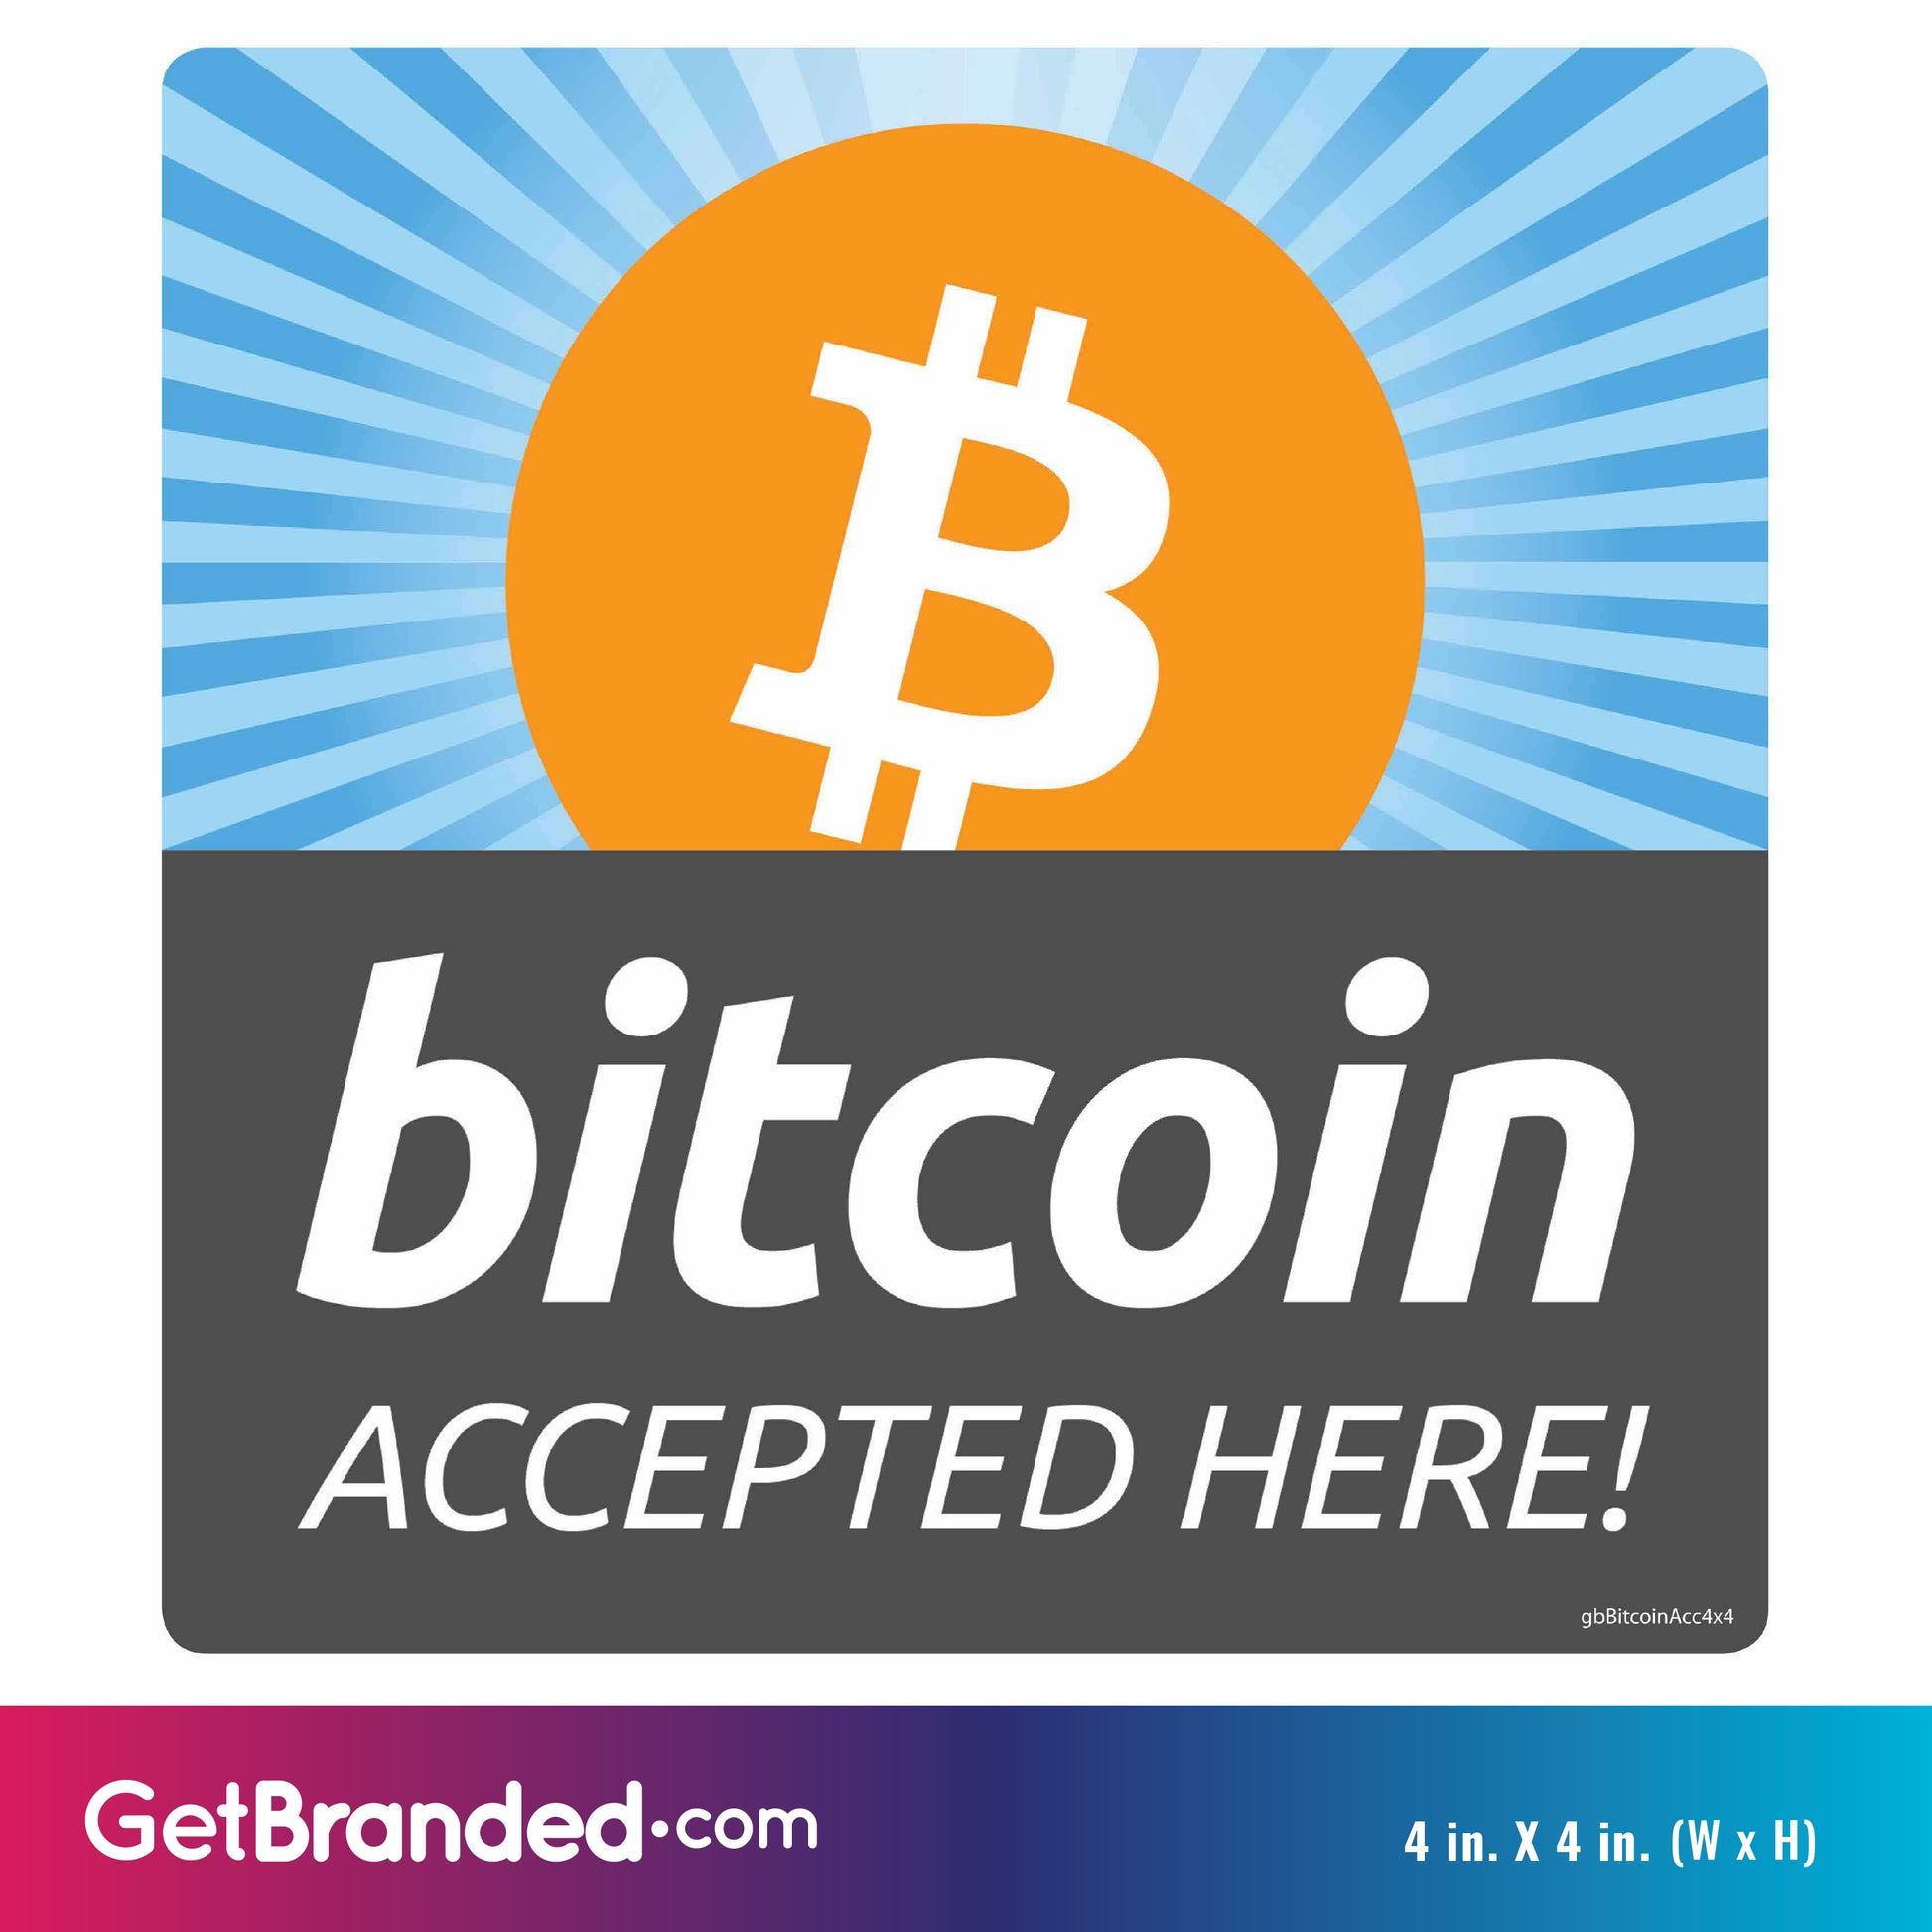 Bitcoin Accepted Here Decal size guide. 4 inches by 4 inches in size.